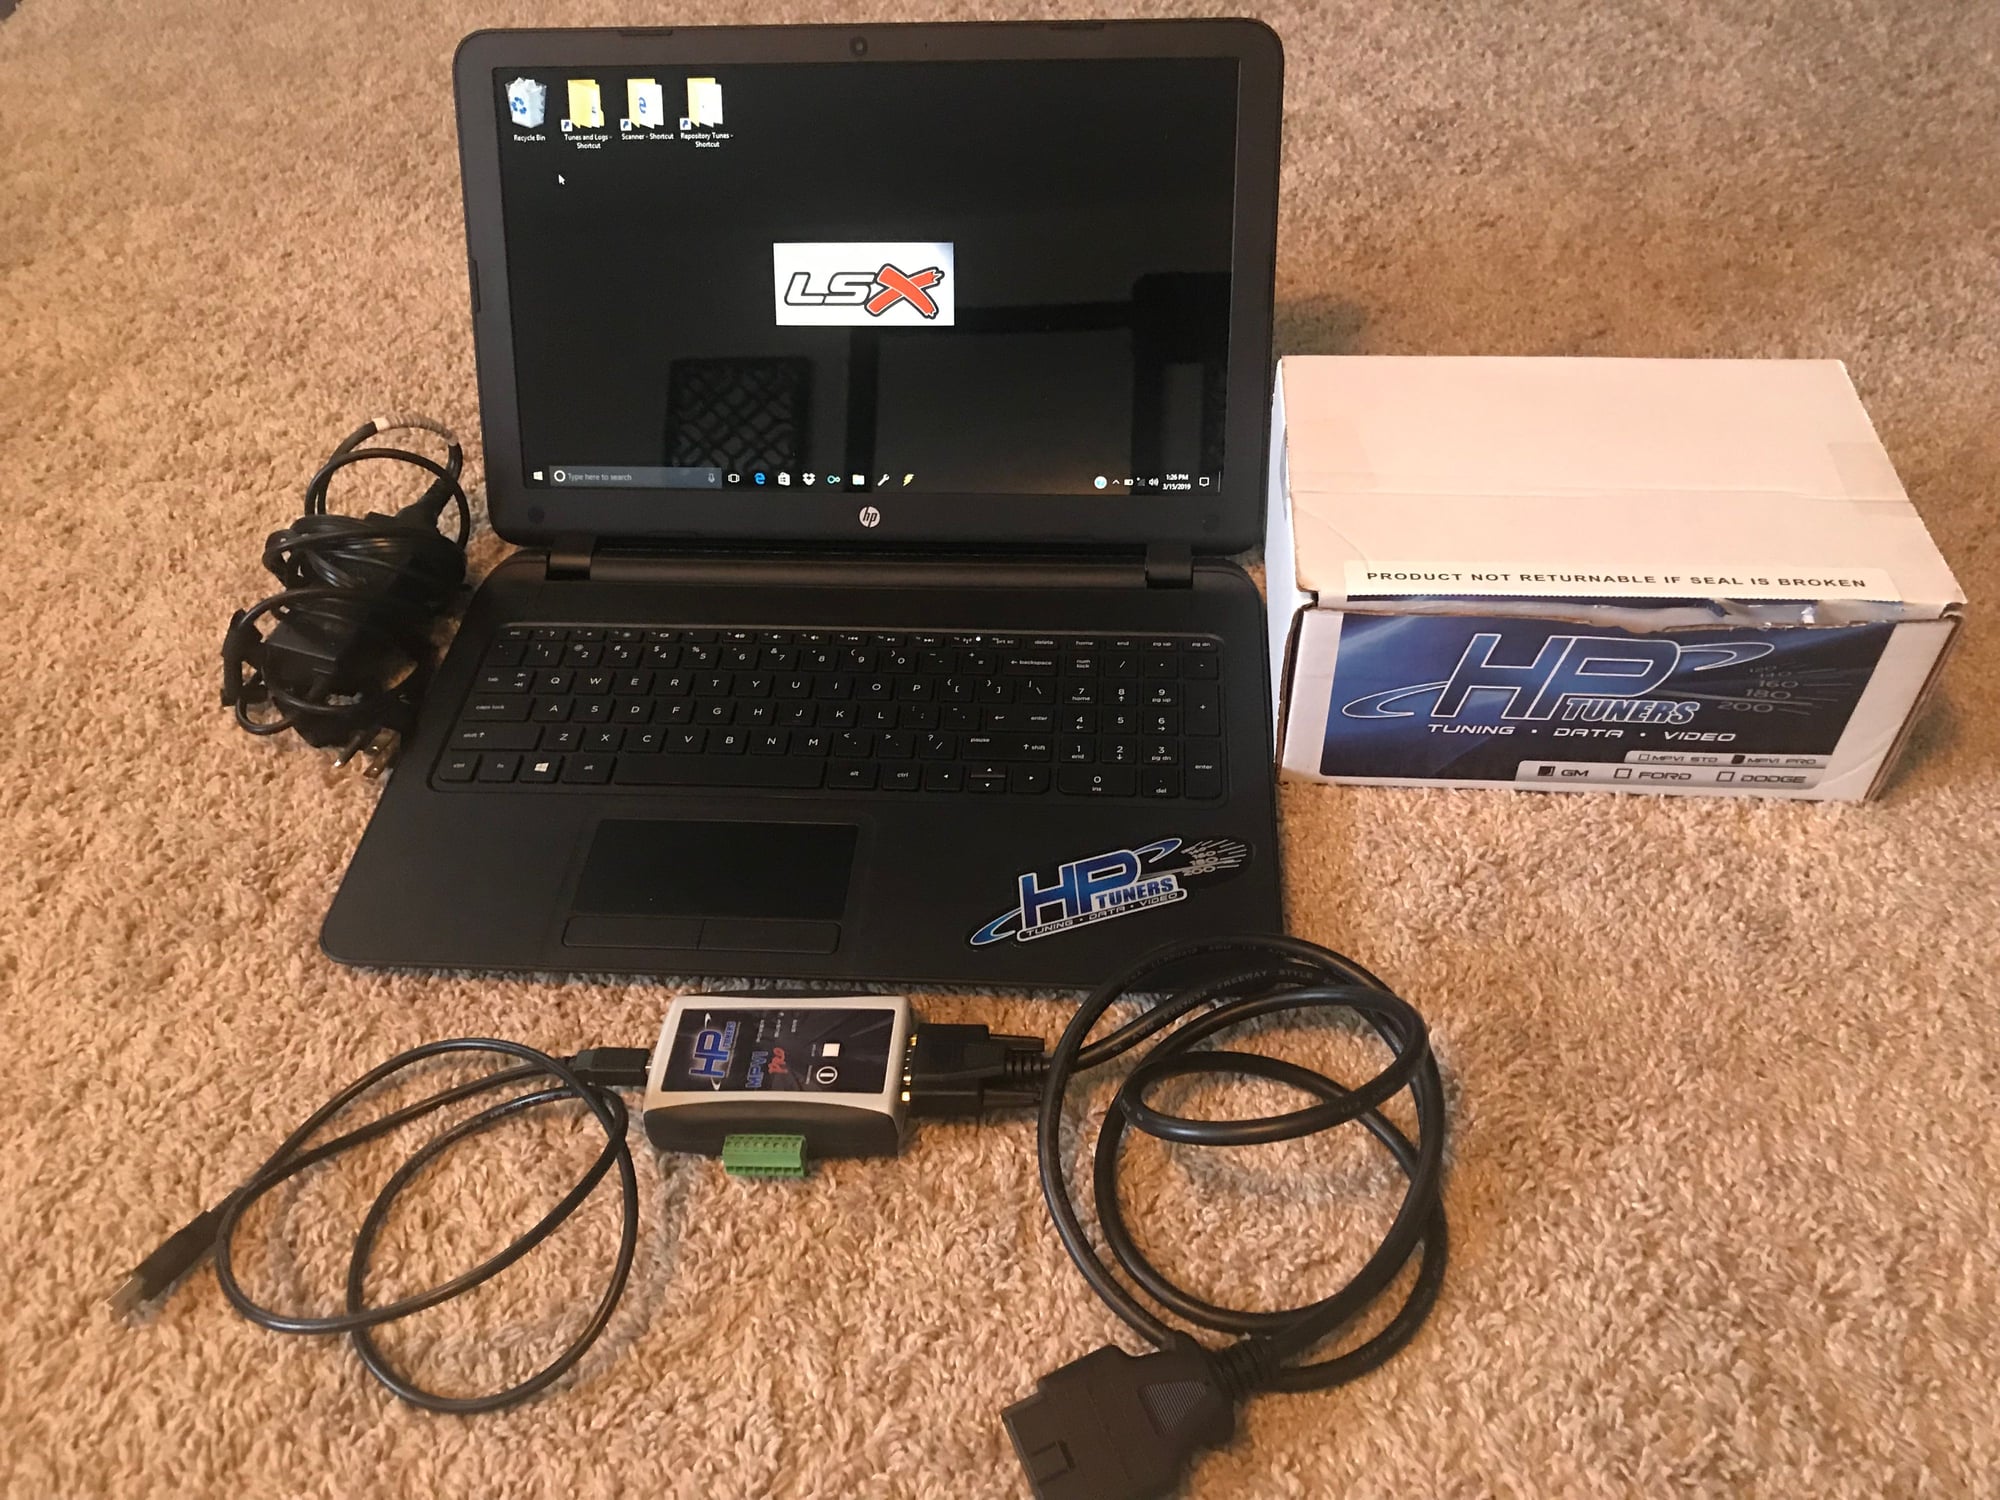  - Hptuners Pro with Laptop and 2gm credits - Monongahela, PA 15063, United States